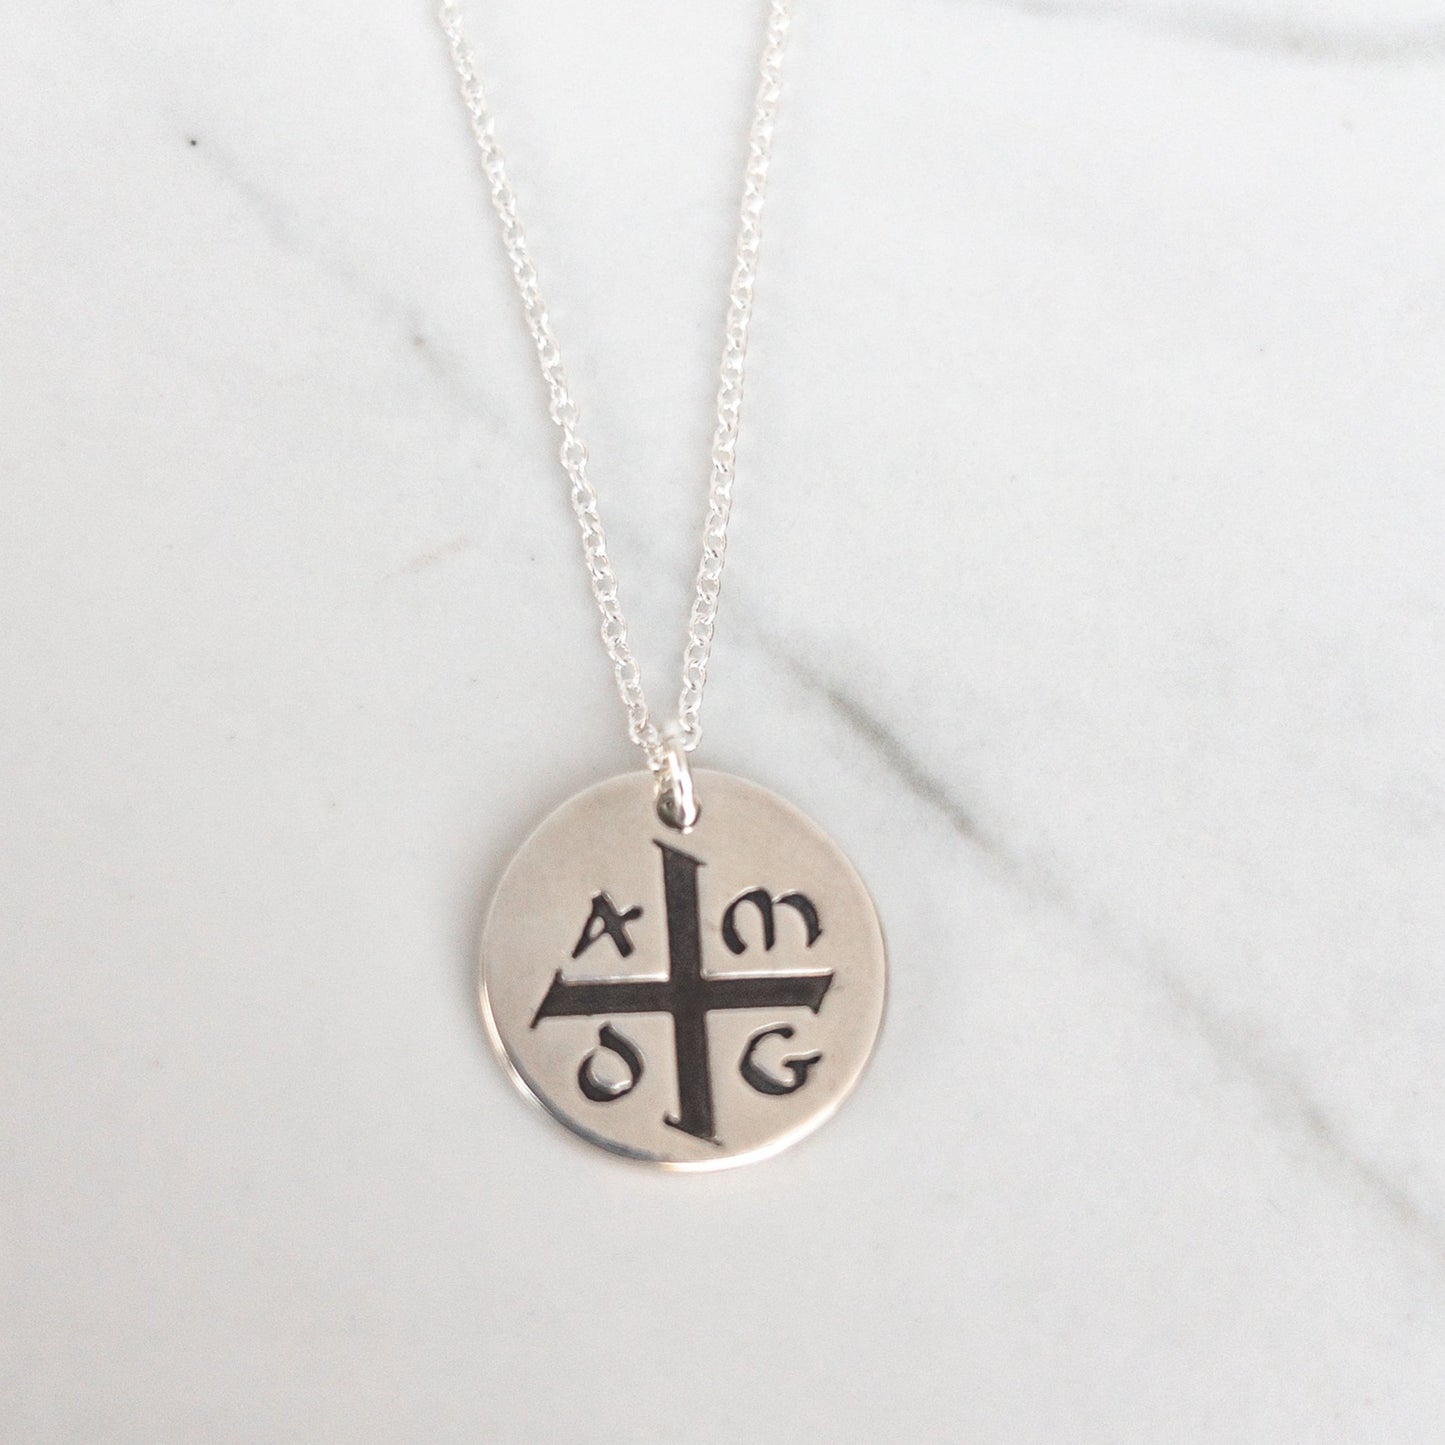 AMDG Sterling Silver Necklace